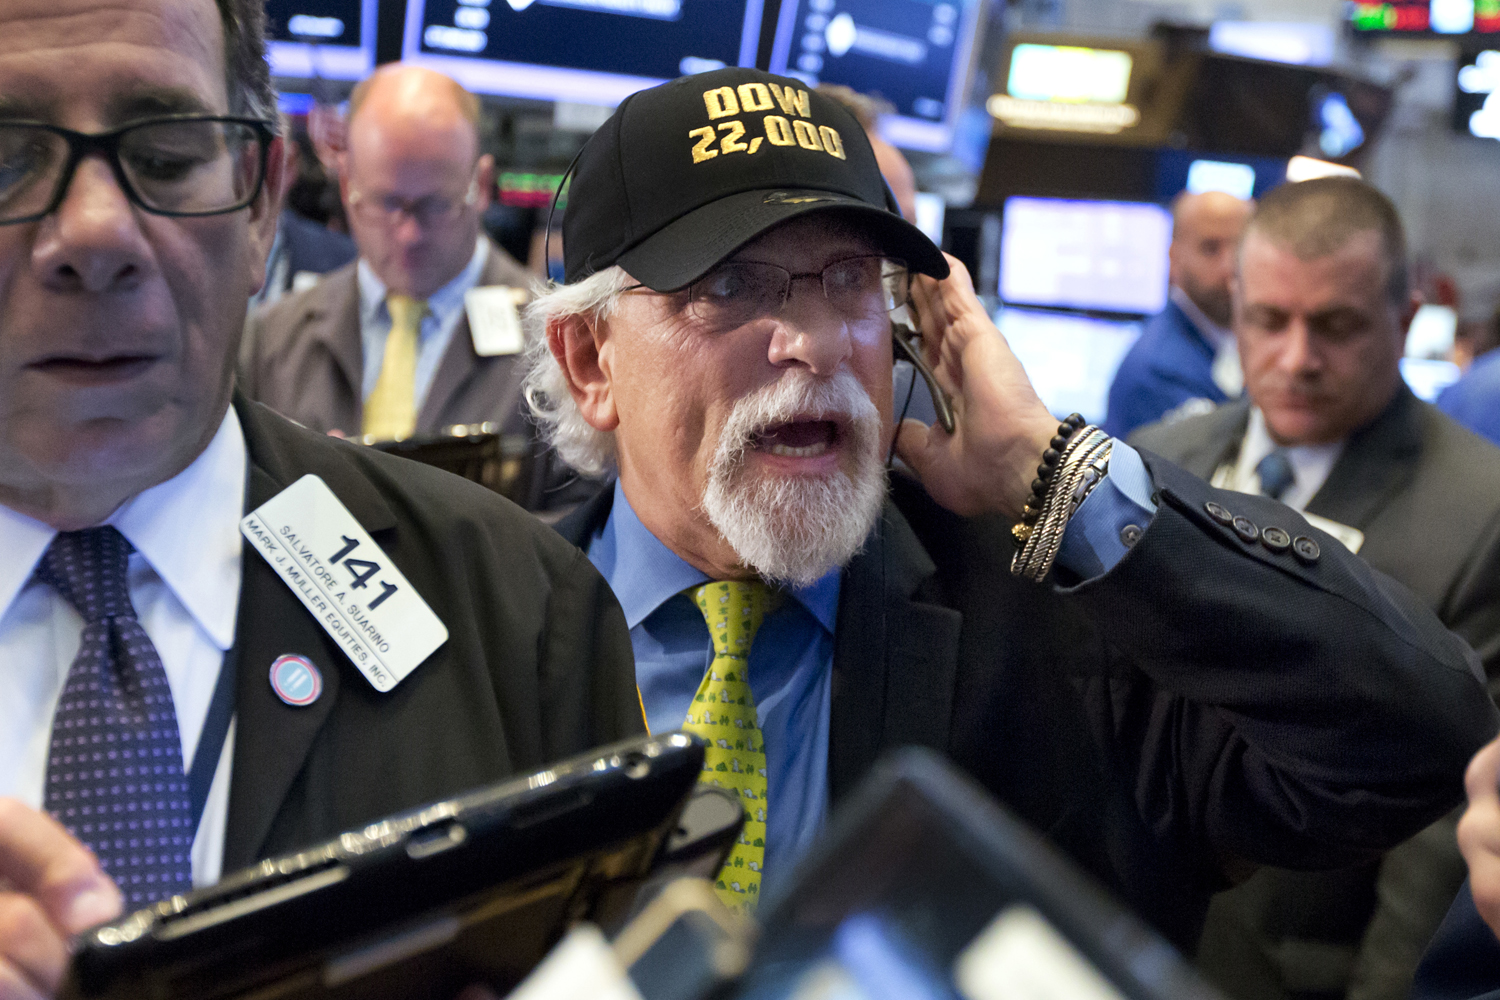 Trader Peter Tuchman, center, wears a "Dow 22,000" hat as he works on the floor of the New York Stock Exchange, Wednesday, Aug. 2, 2017. (Richard Drew/AP)